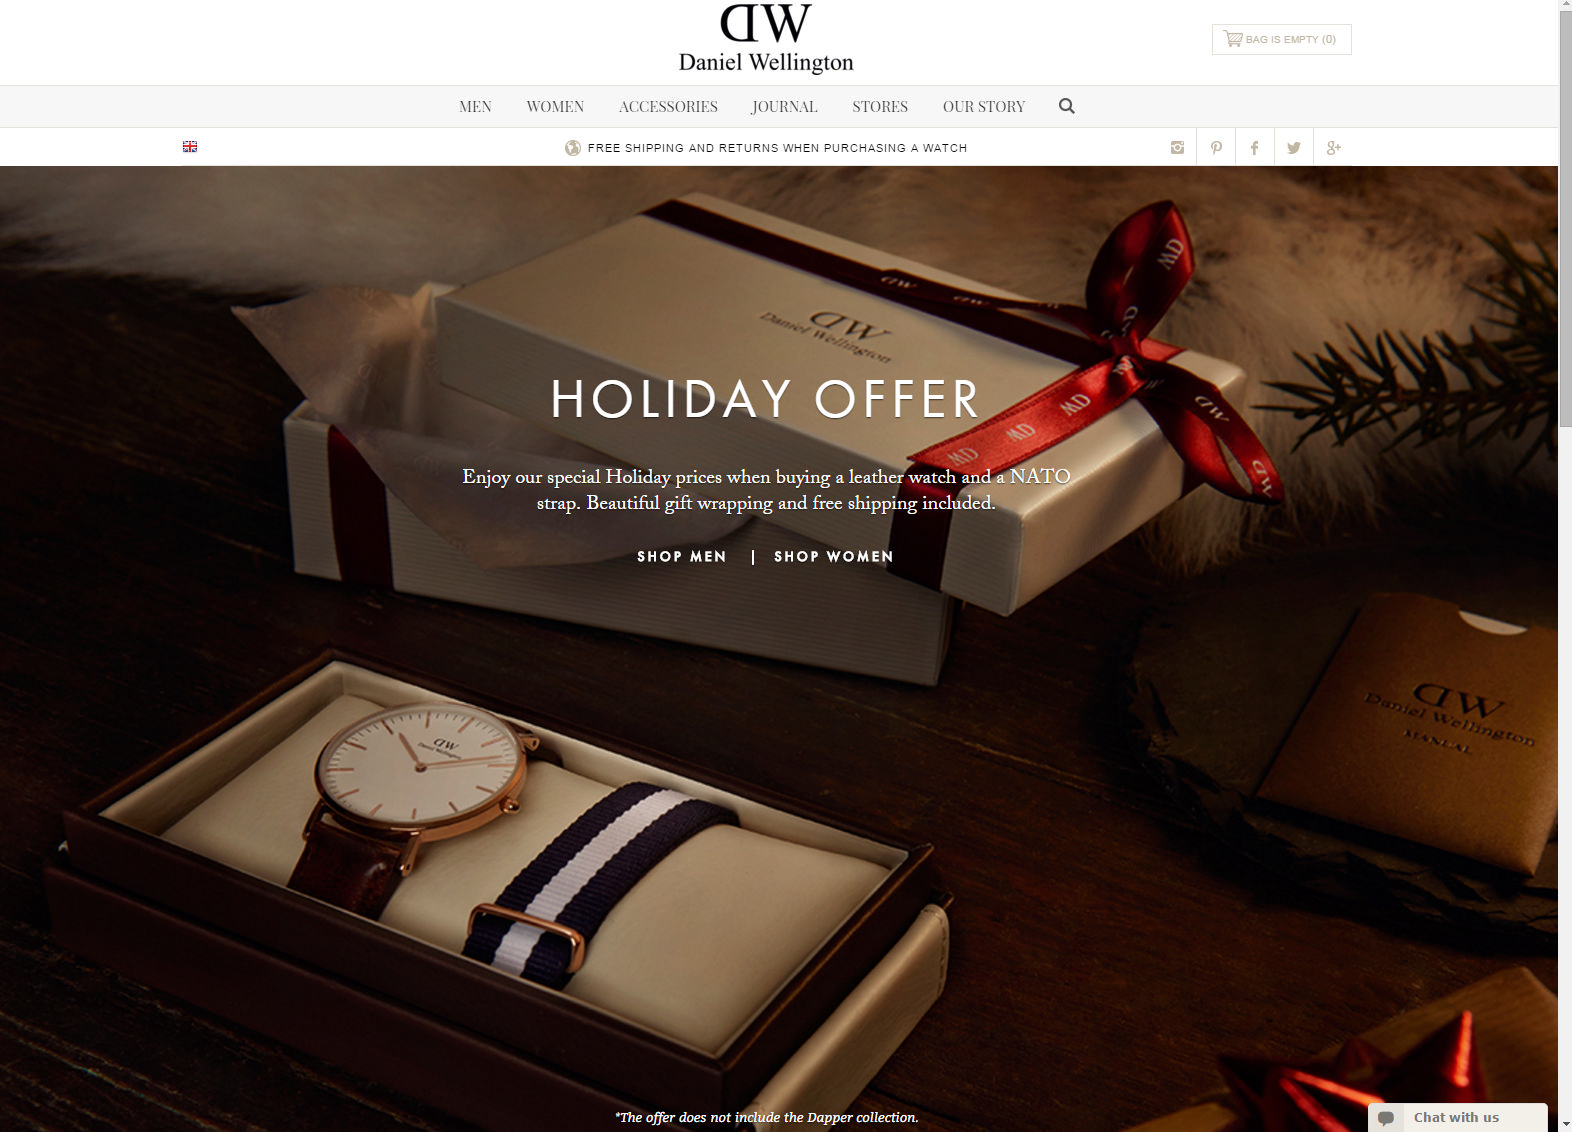 How to bring festive cheer onto your website